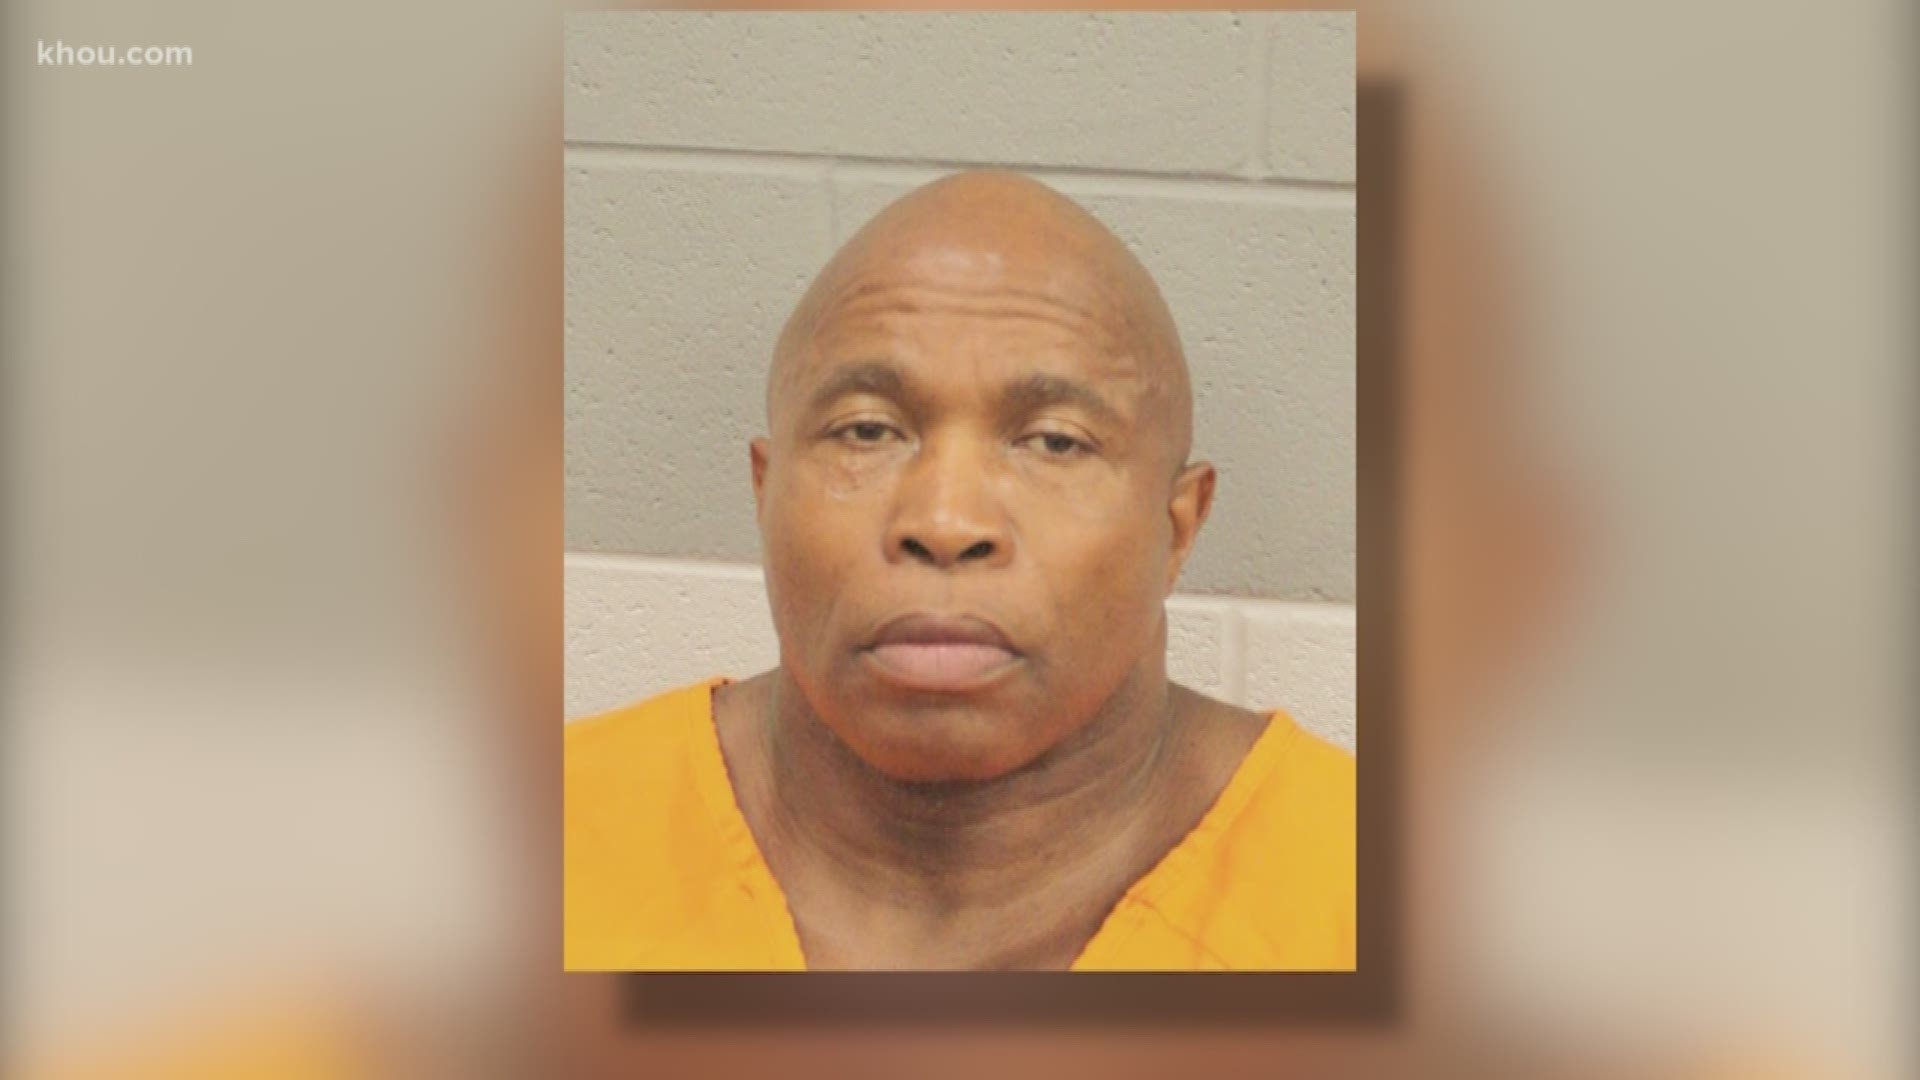 A Harris County Sheriff's deputy charged with murdering his wife is now out of jail on bond. Renard Spivey's high-profile attorney claims Spivey tried his best to revive his wife after she was shot.